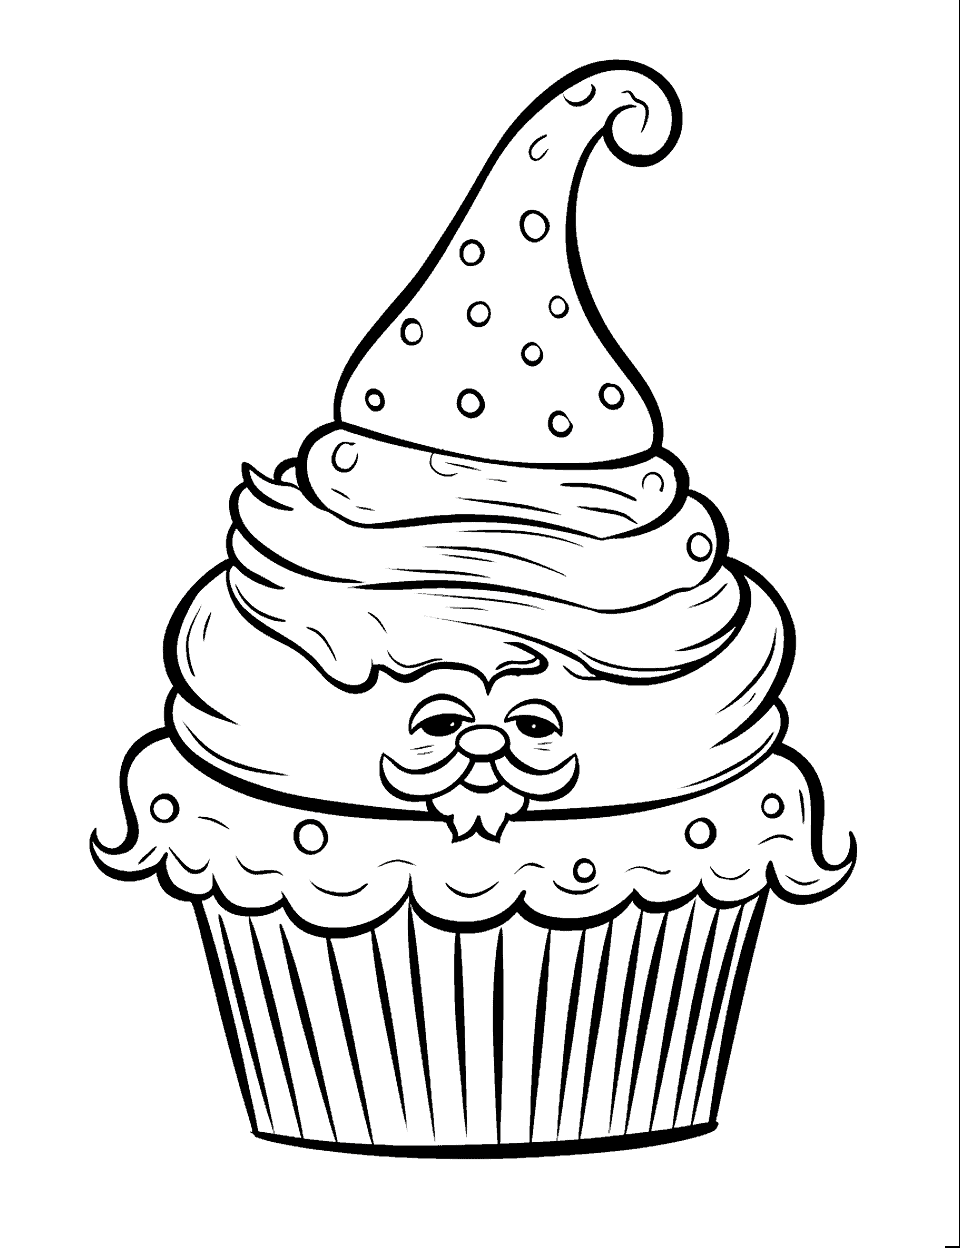 Cupcake Wizard Coloring Page - A magical cupcake that looks like a wizard’s head with a hat.